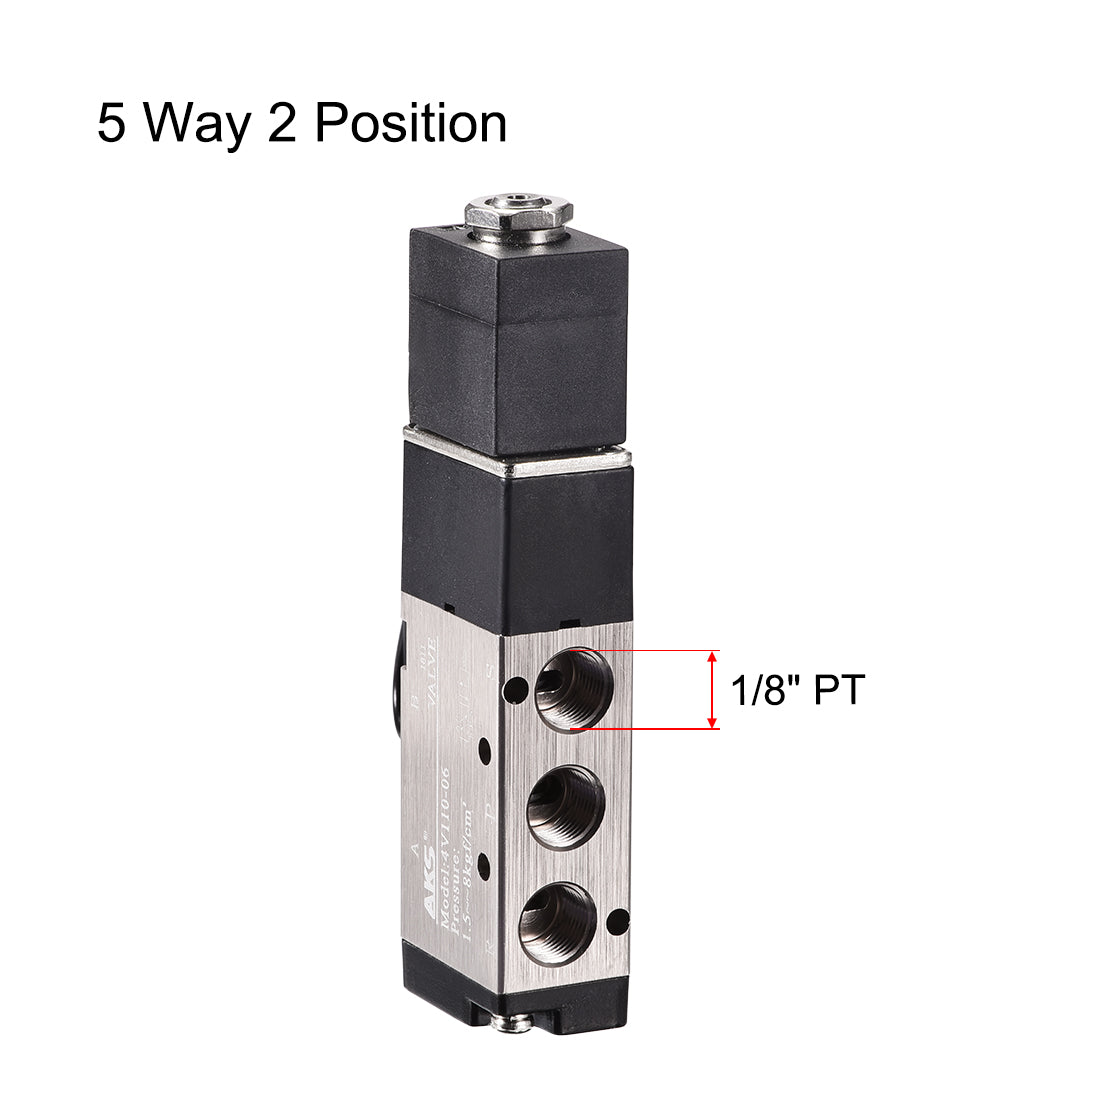 uxcell Uxcell 4V110-06 Pneumatic Electrical Control Solenoid Valve DC 24V 5 Way 2 Position 1/8" PT Internally Single Piloted Acting Type